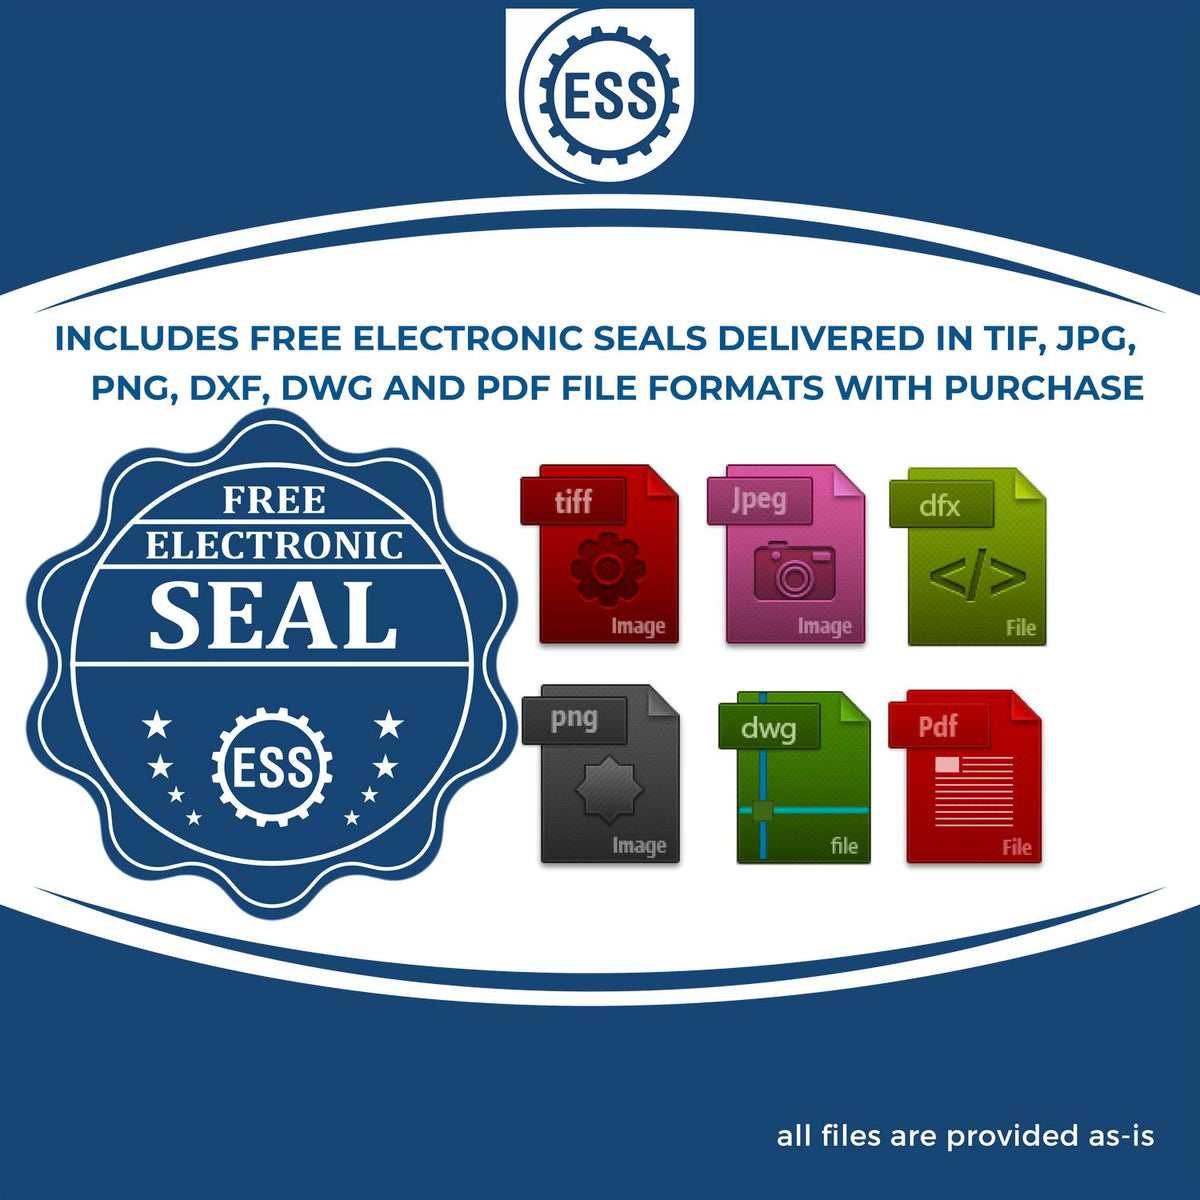 An infographic for the free electronic seal for the Handheld Michigan Professional Geologist Embosser illustrating the different file type icons such as DXF, DWG, TIF, JPG and PNG.